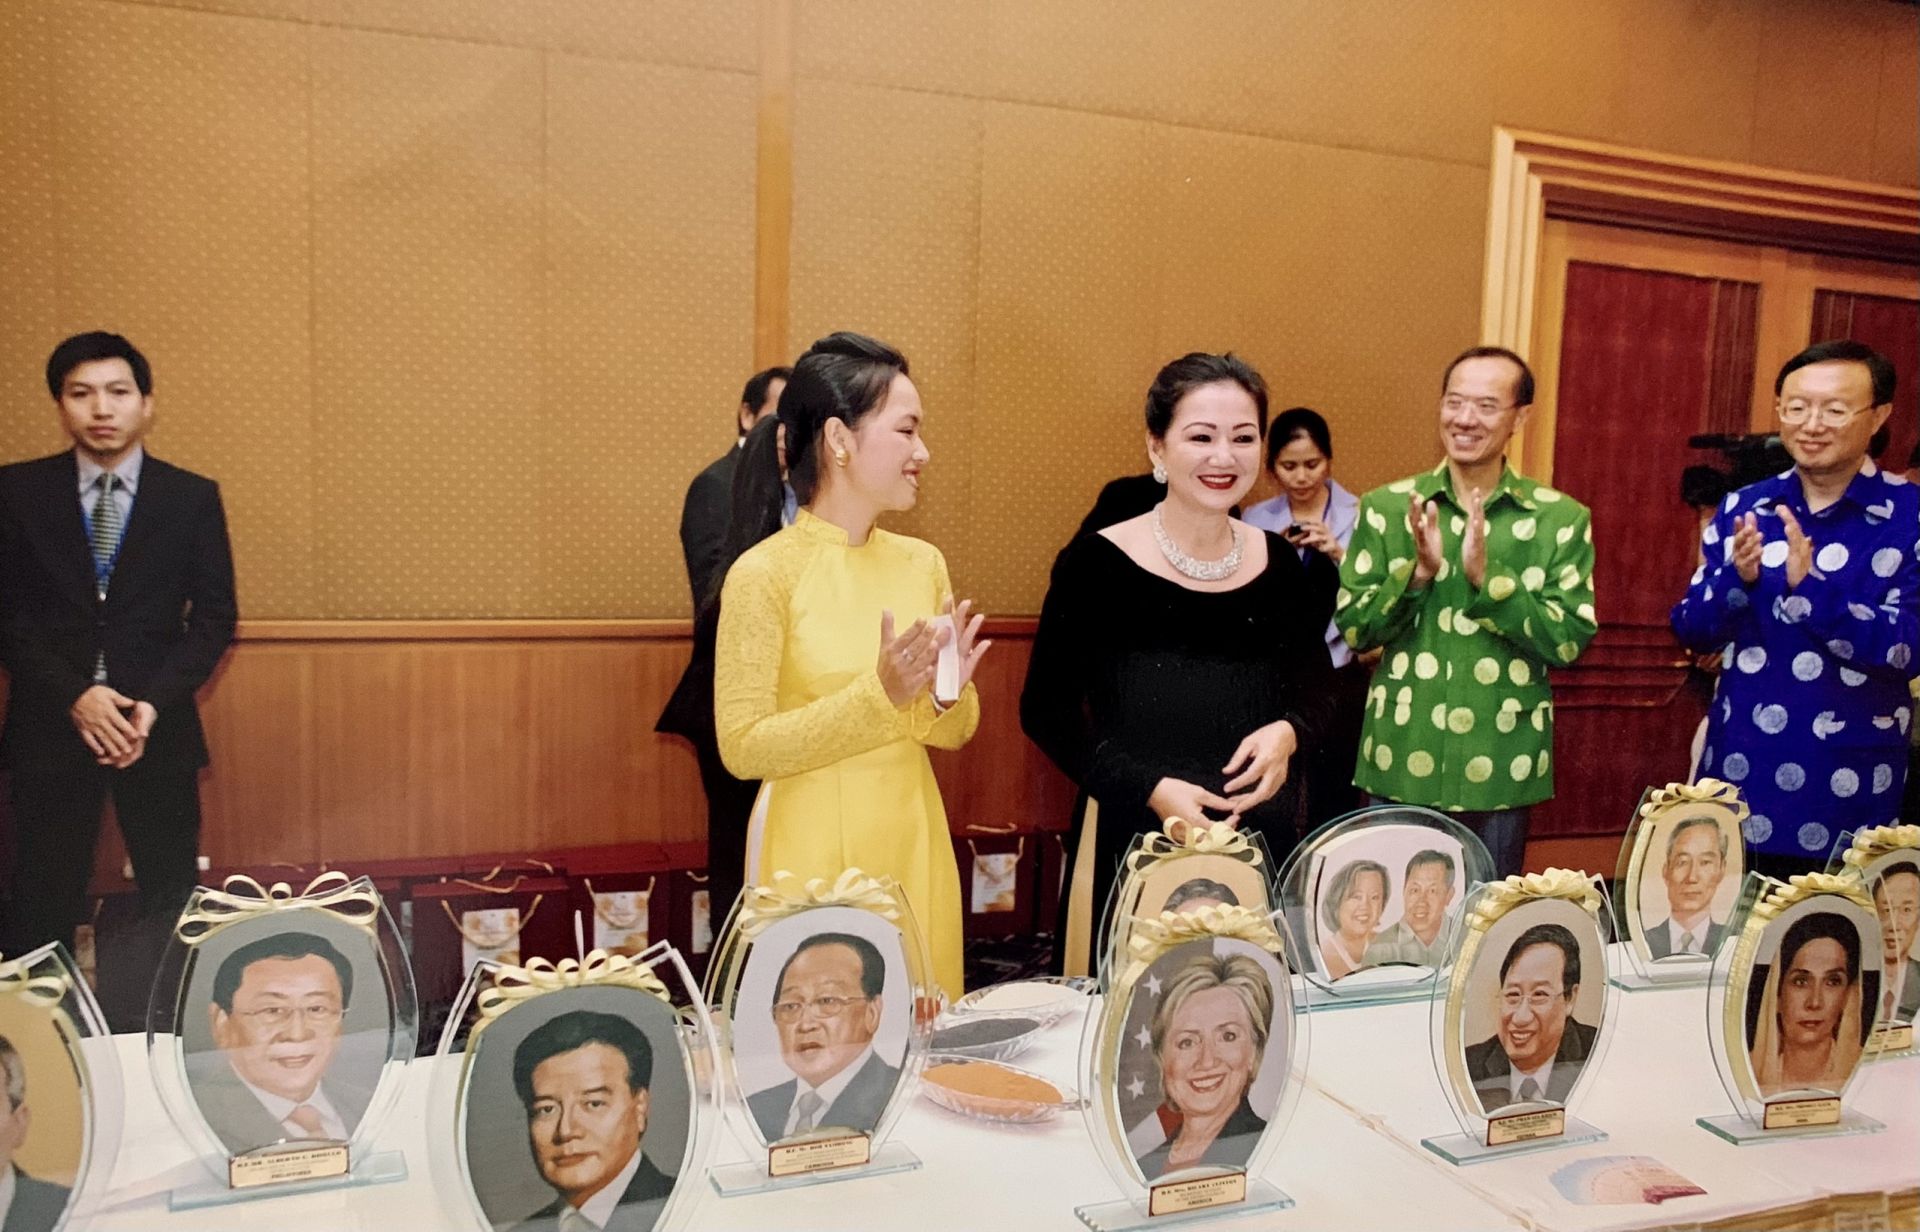 Artist Y Lan introducing 21 portrait sand art works of APEC economic leaders attending the Summit Conference in Hanoi at the end of 2006.